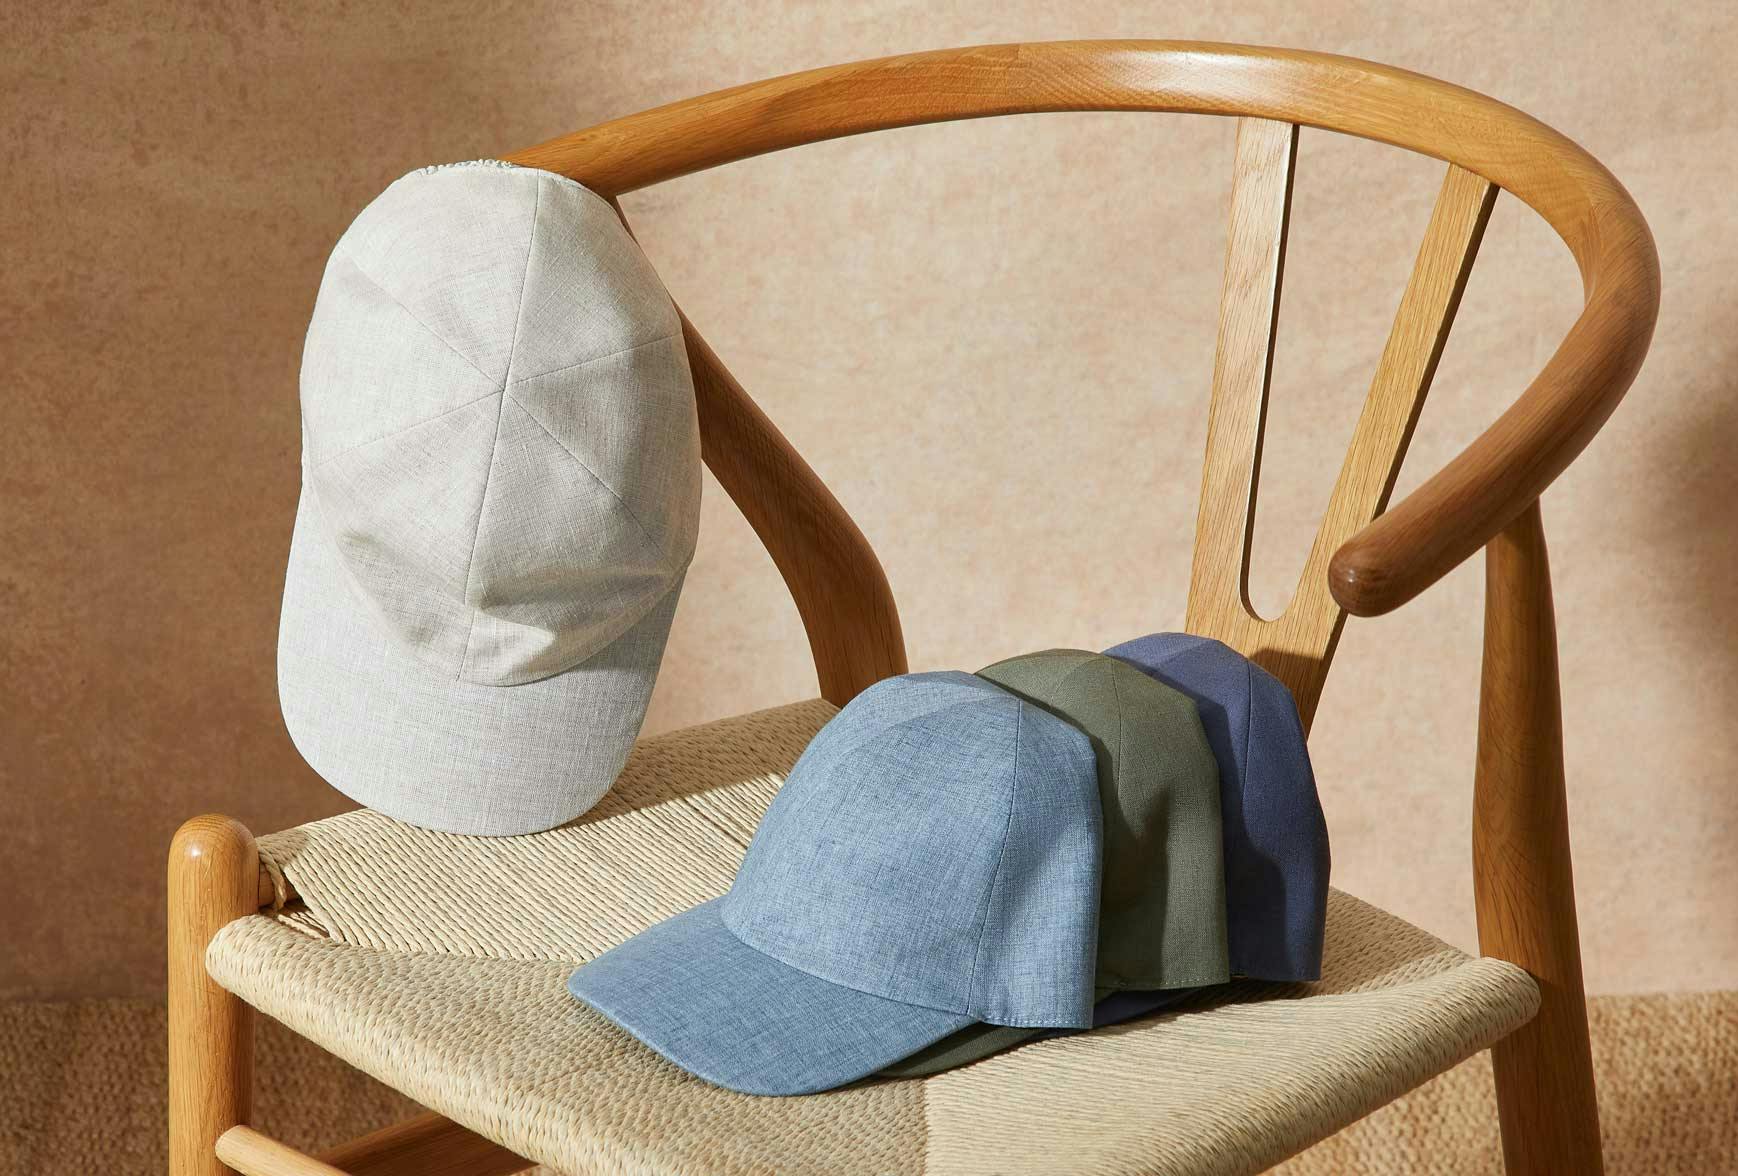 Linen caps, in different colors, on a chair